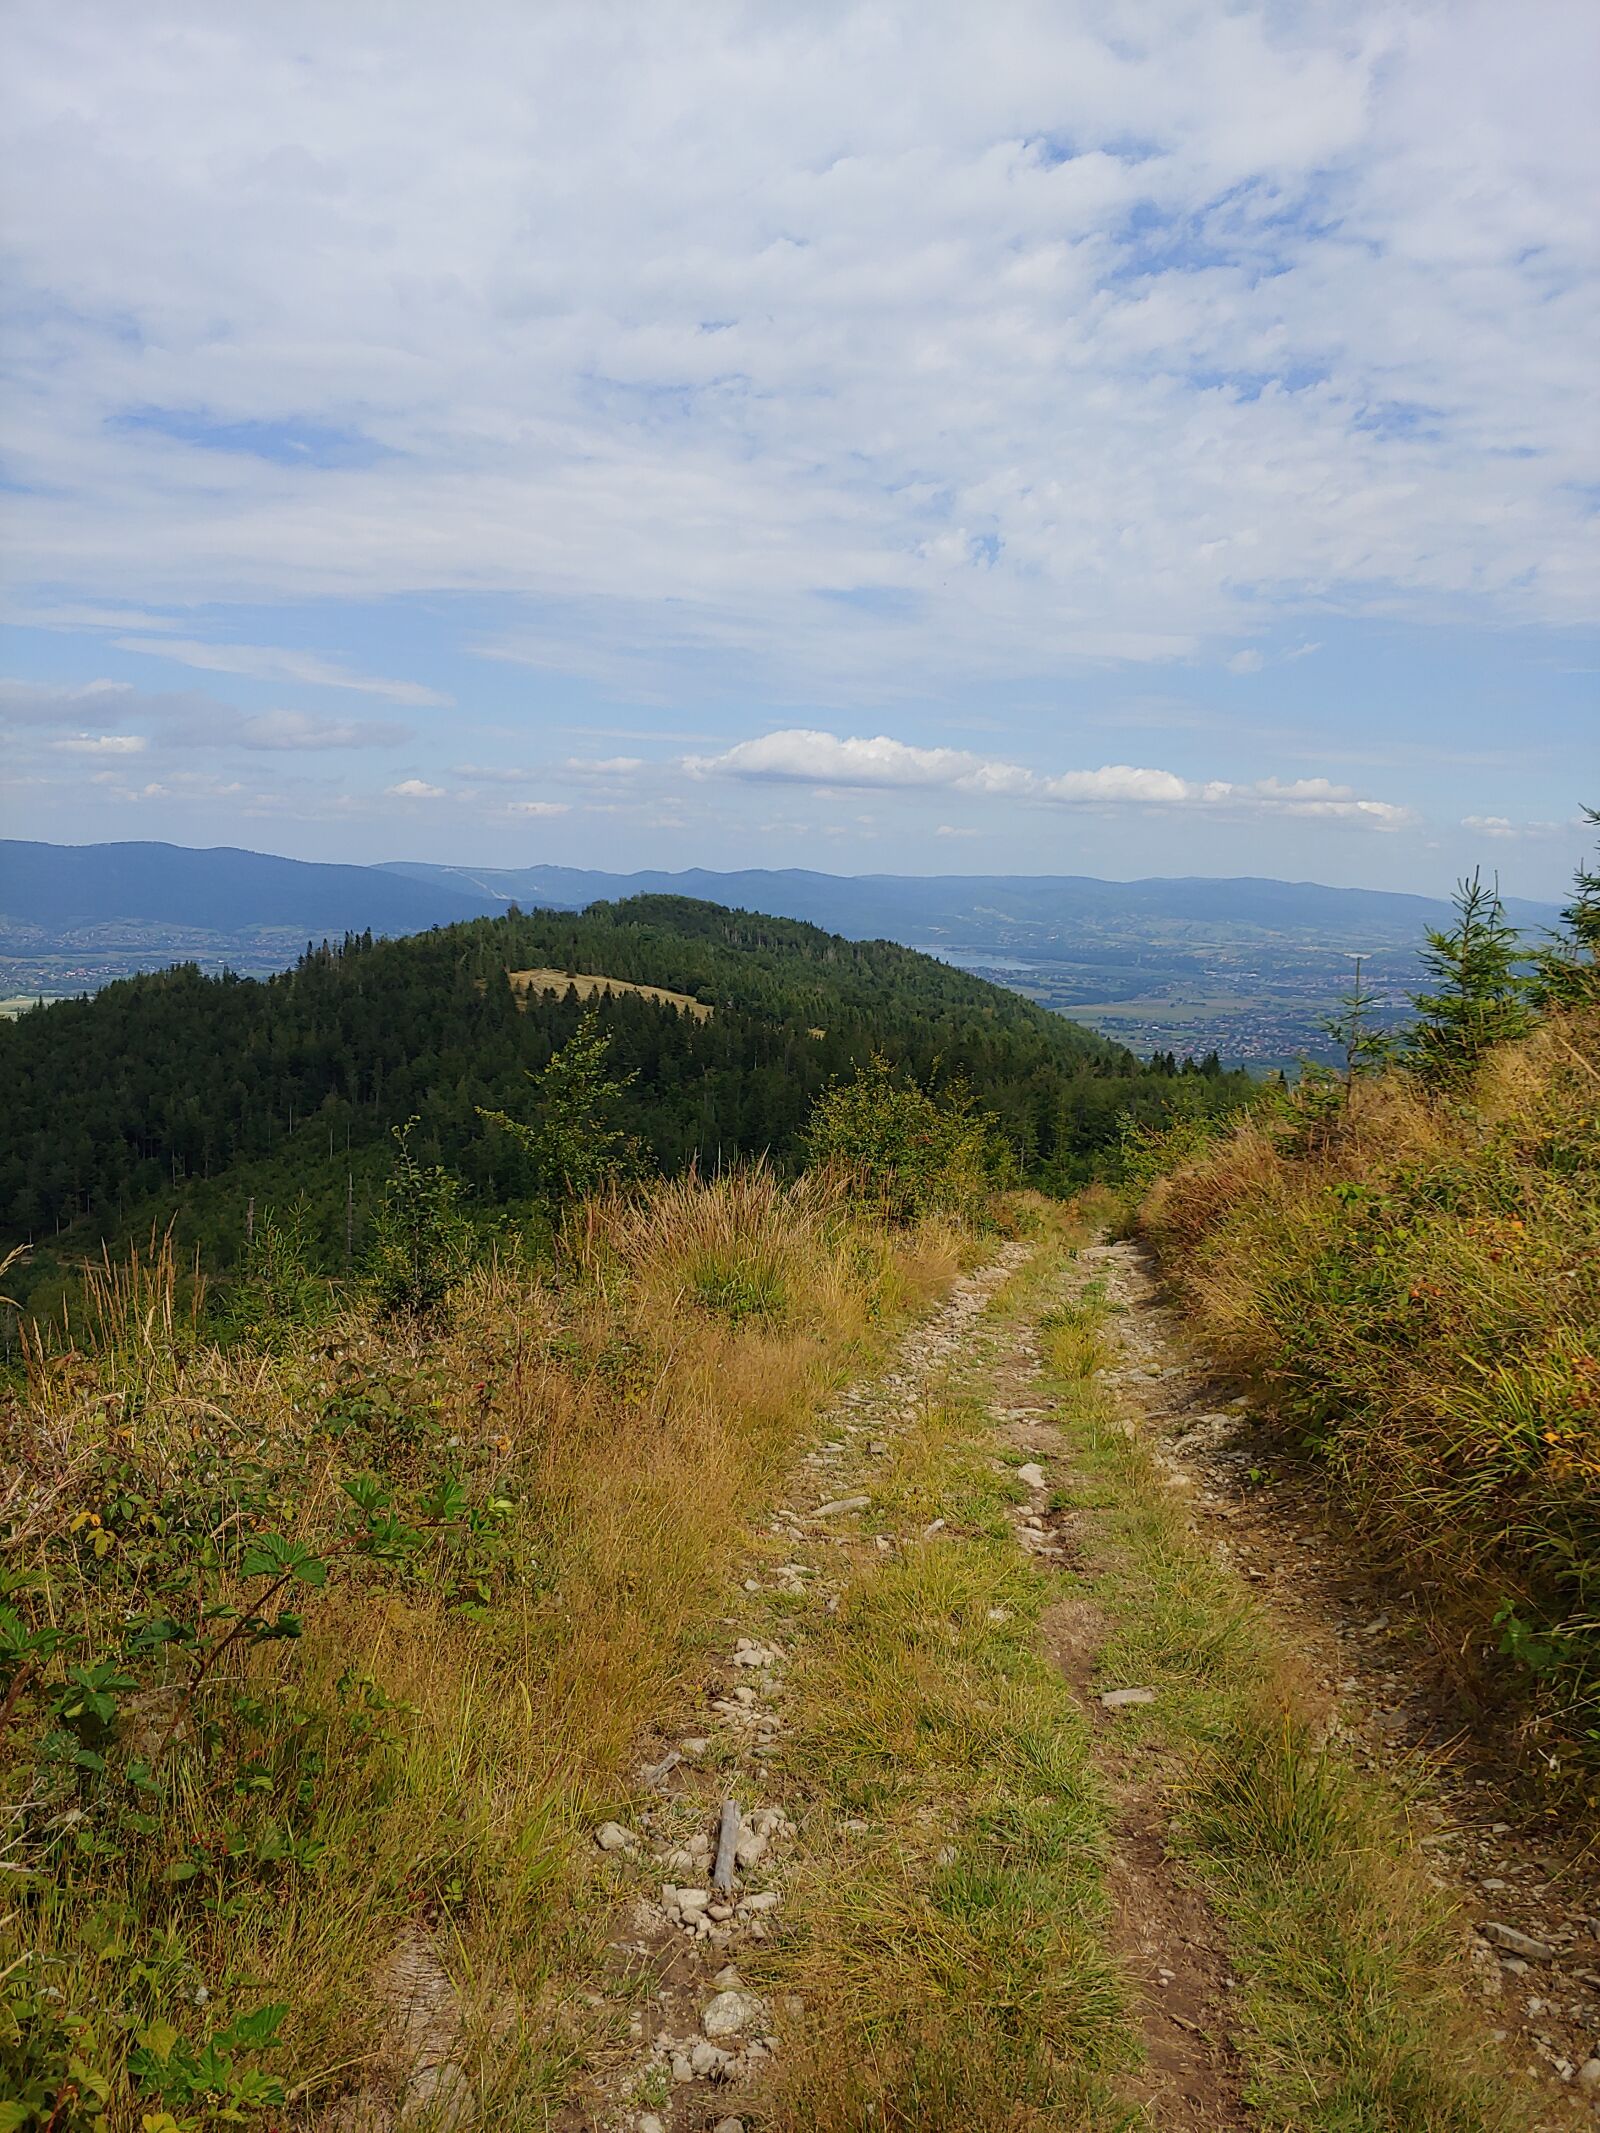 LG G7 THINQ sample photo. Mountains, view, silesian beskid photography